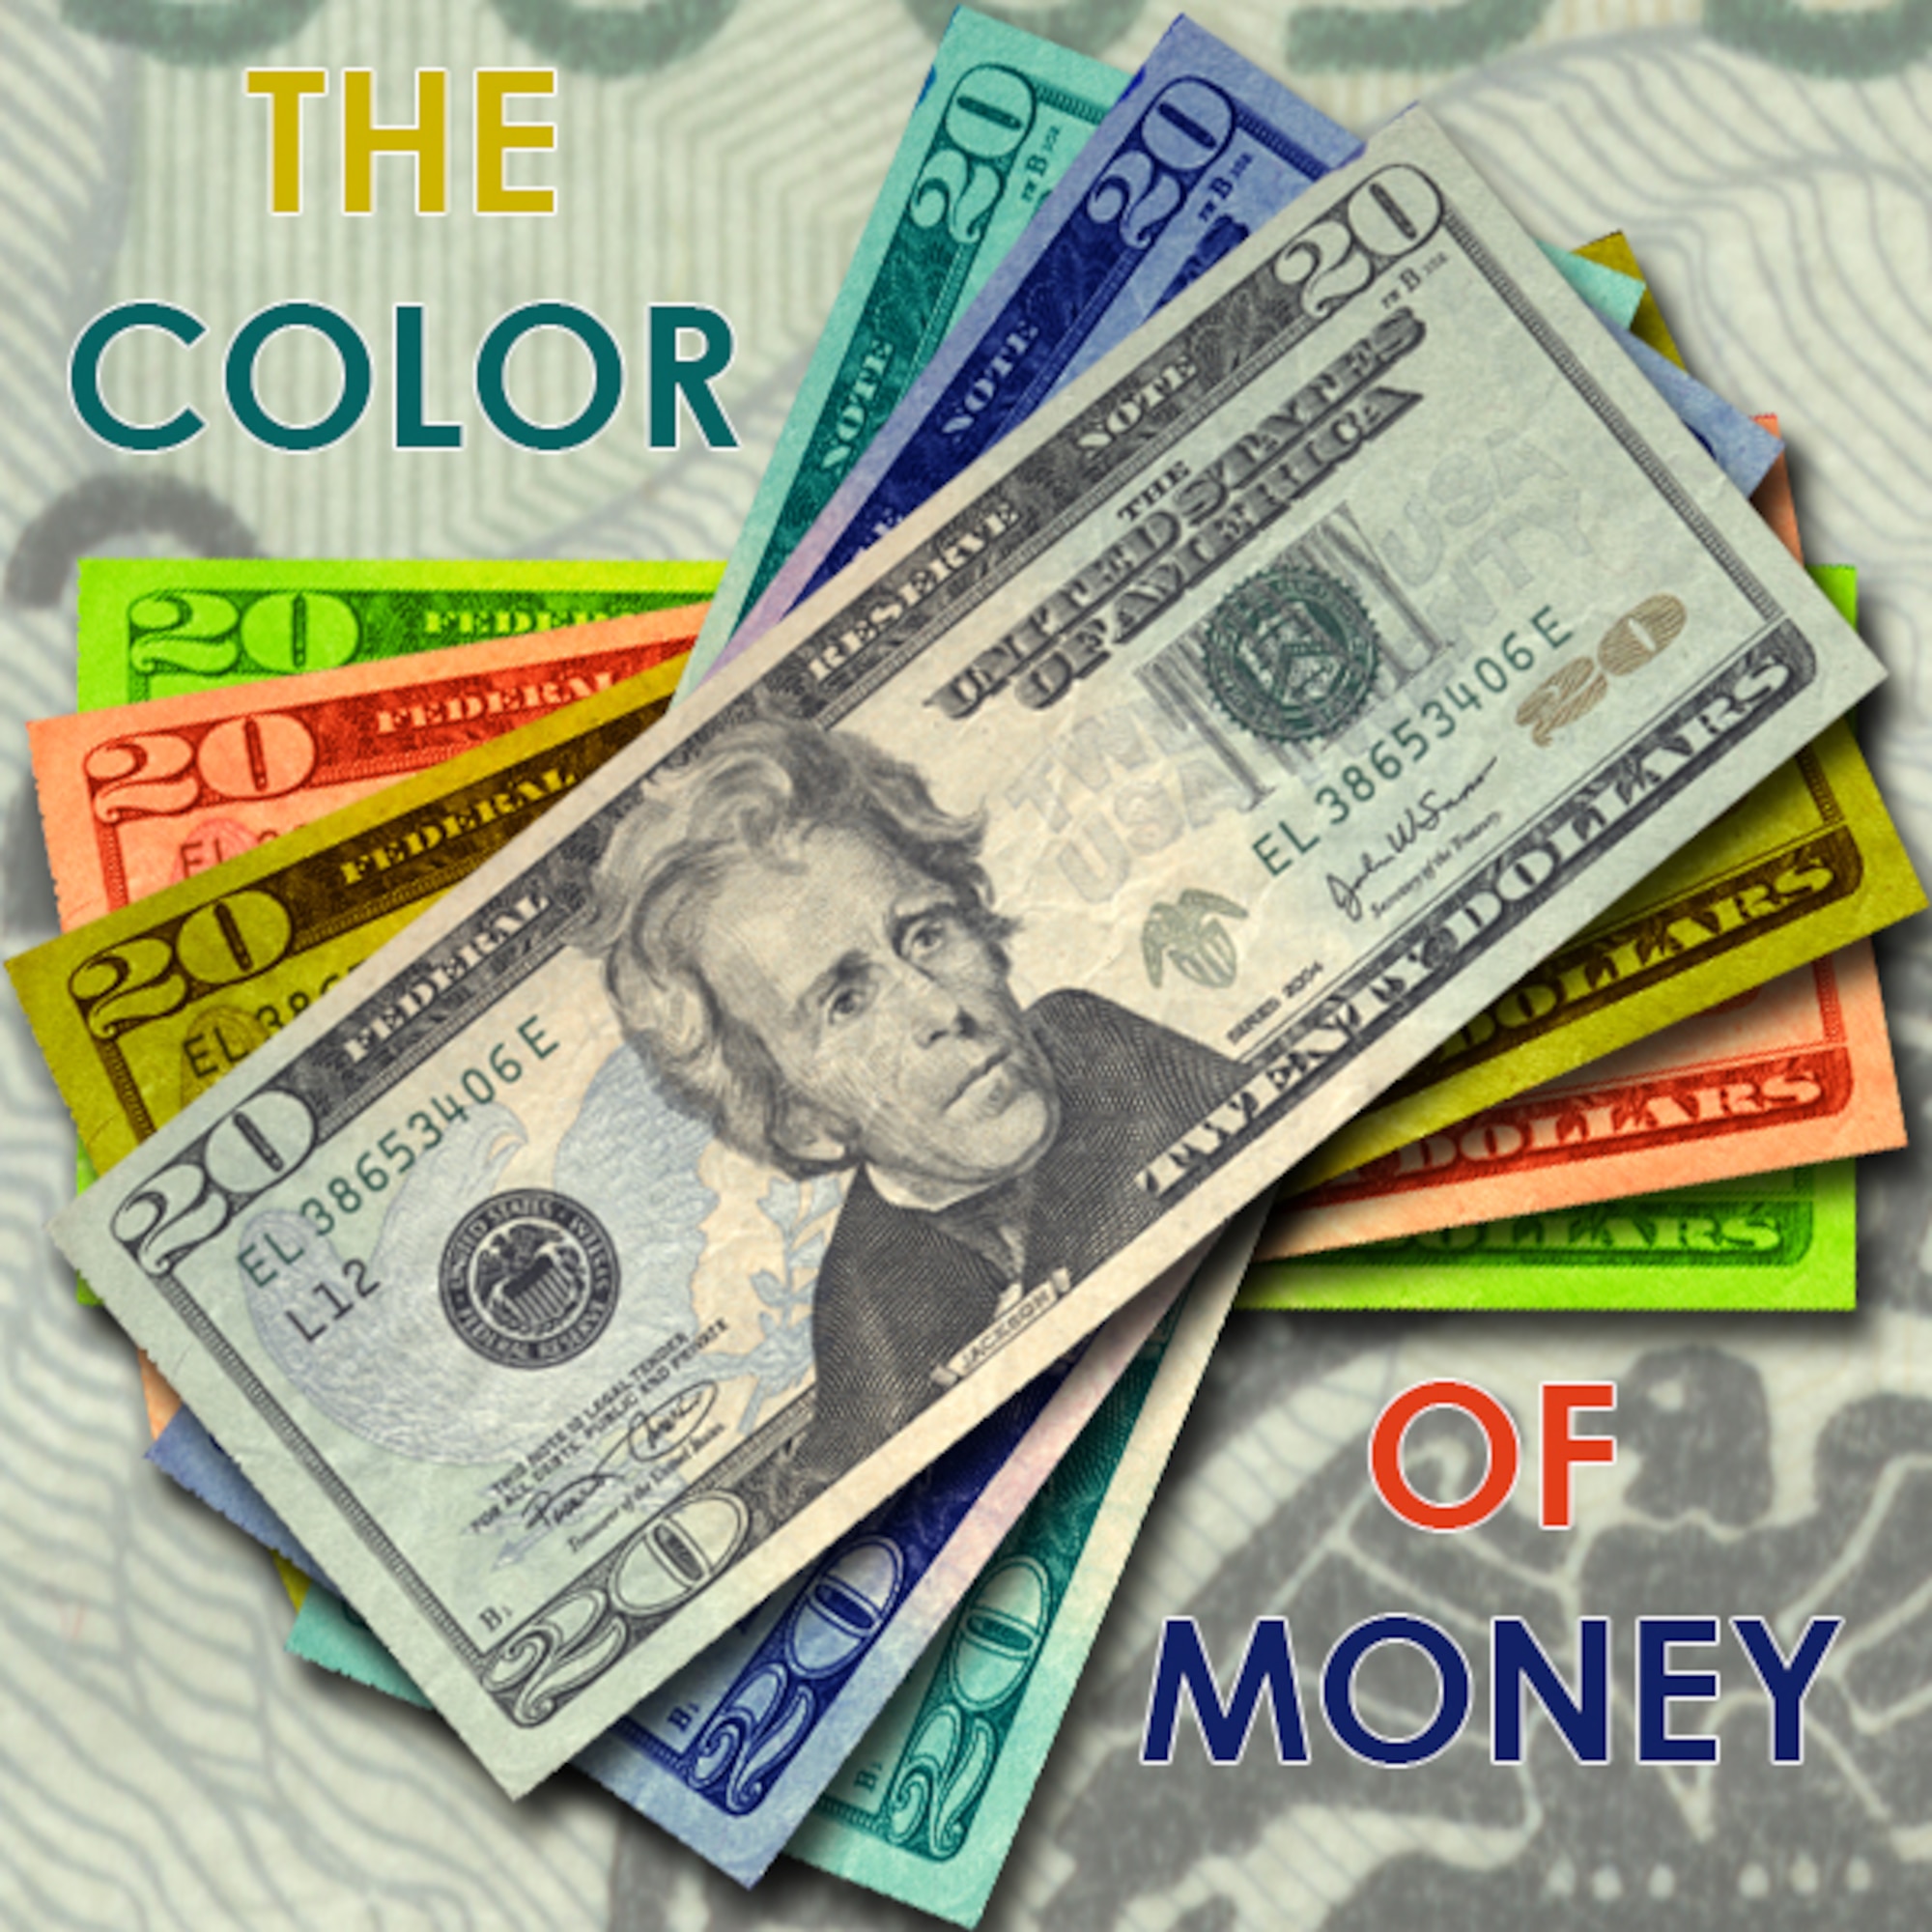 the ‘color of money’ refers to the different categories of budget dollars and the specific uses on which they may be spent. Under-execution of funds in one area can result in future budget cuts. Individual Reservists are encouraged to perform all of their Inactive Duty Training and Annual Tour days to help ensure adequate funding is available for training in subsequent fiscal years. (U.S. Air Force graphic/Master Sgt. Timm Huffman)